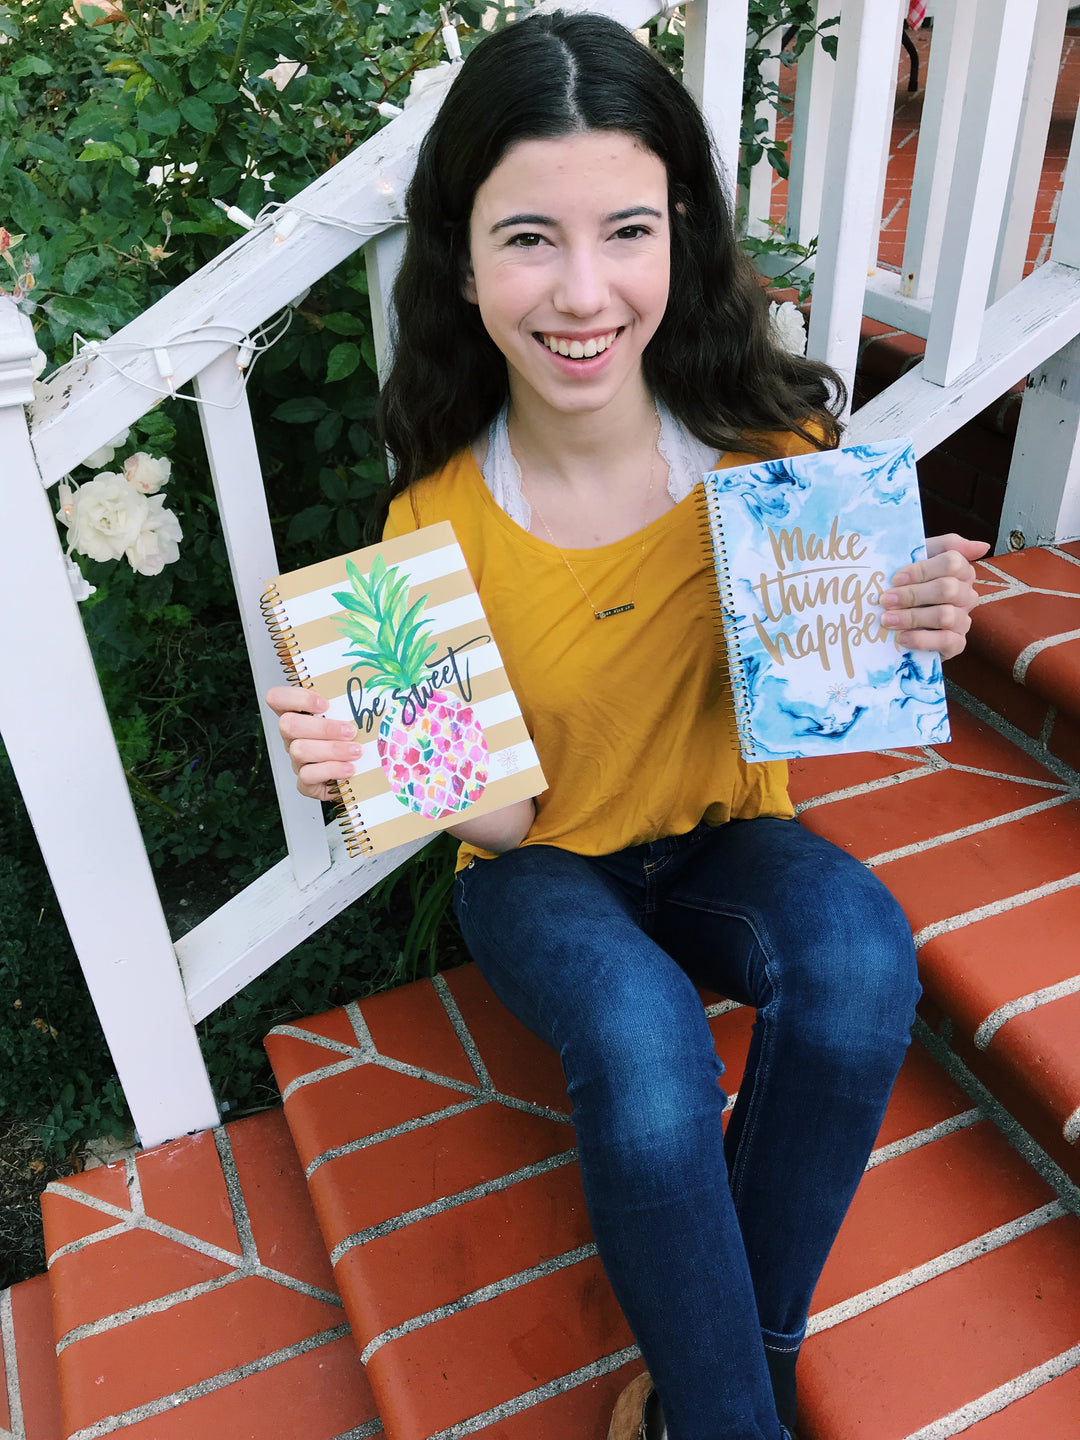 Featured #bloomgirl: Kate; High School Student and Etsy Shop Owner!